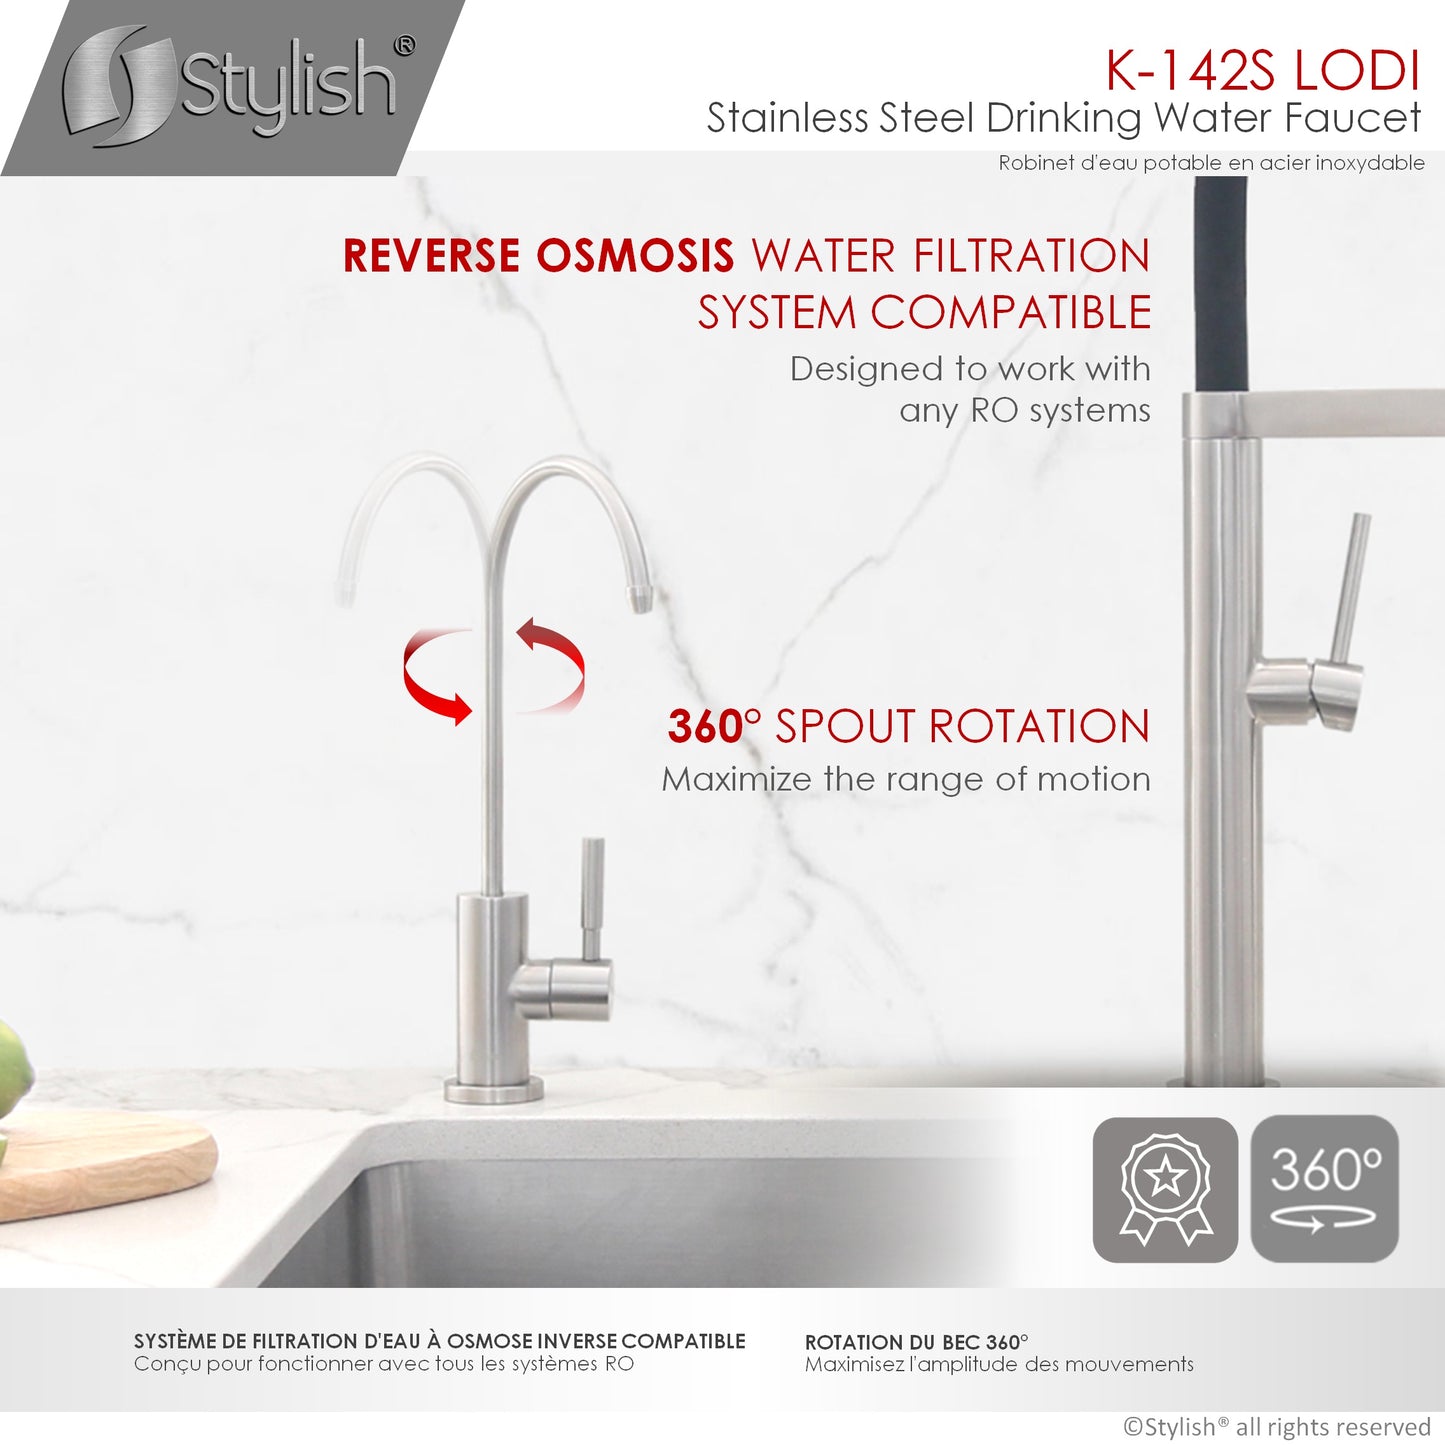 STYLISH Lodi Kitchen Sink Drinking Water Tap Faucet, Stainless Steel Brushed Black Finish K-142S